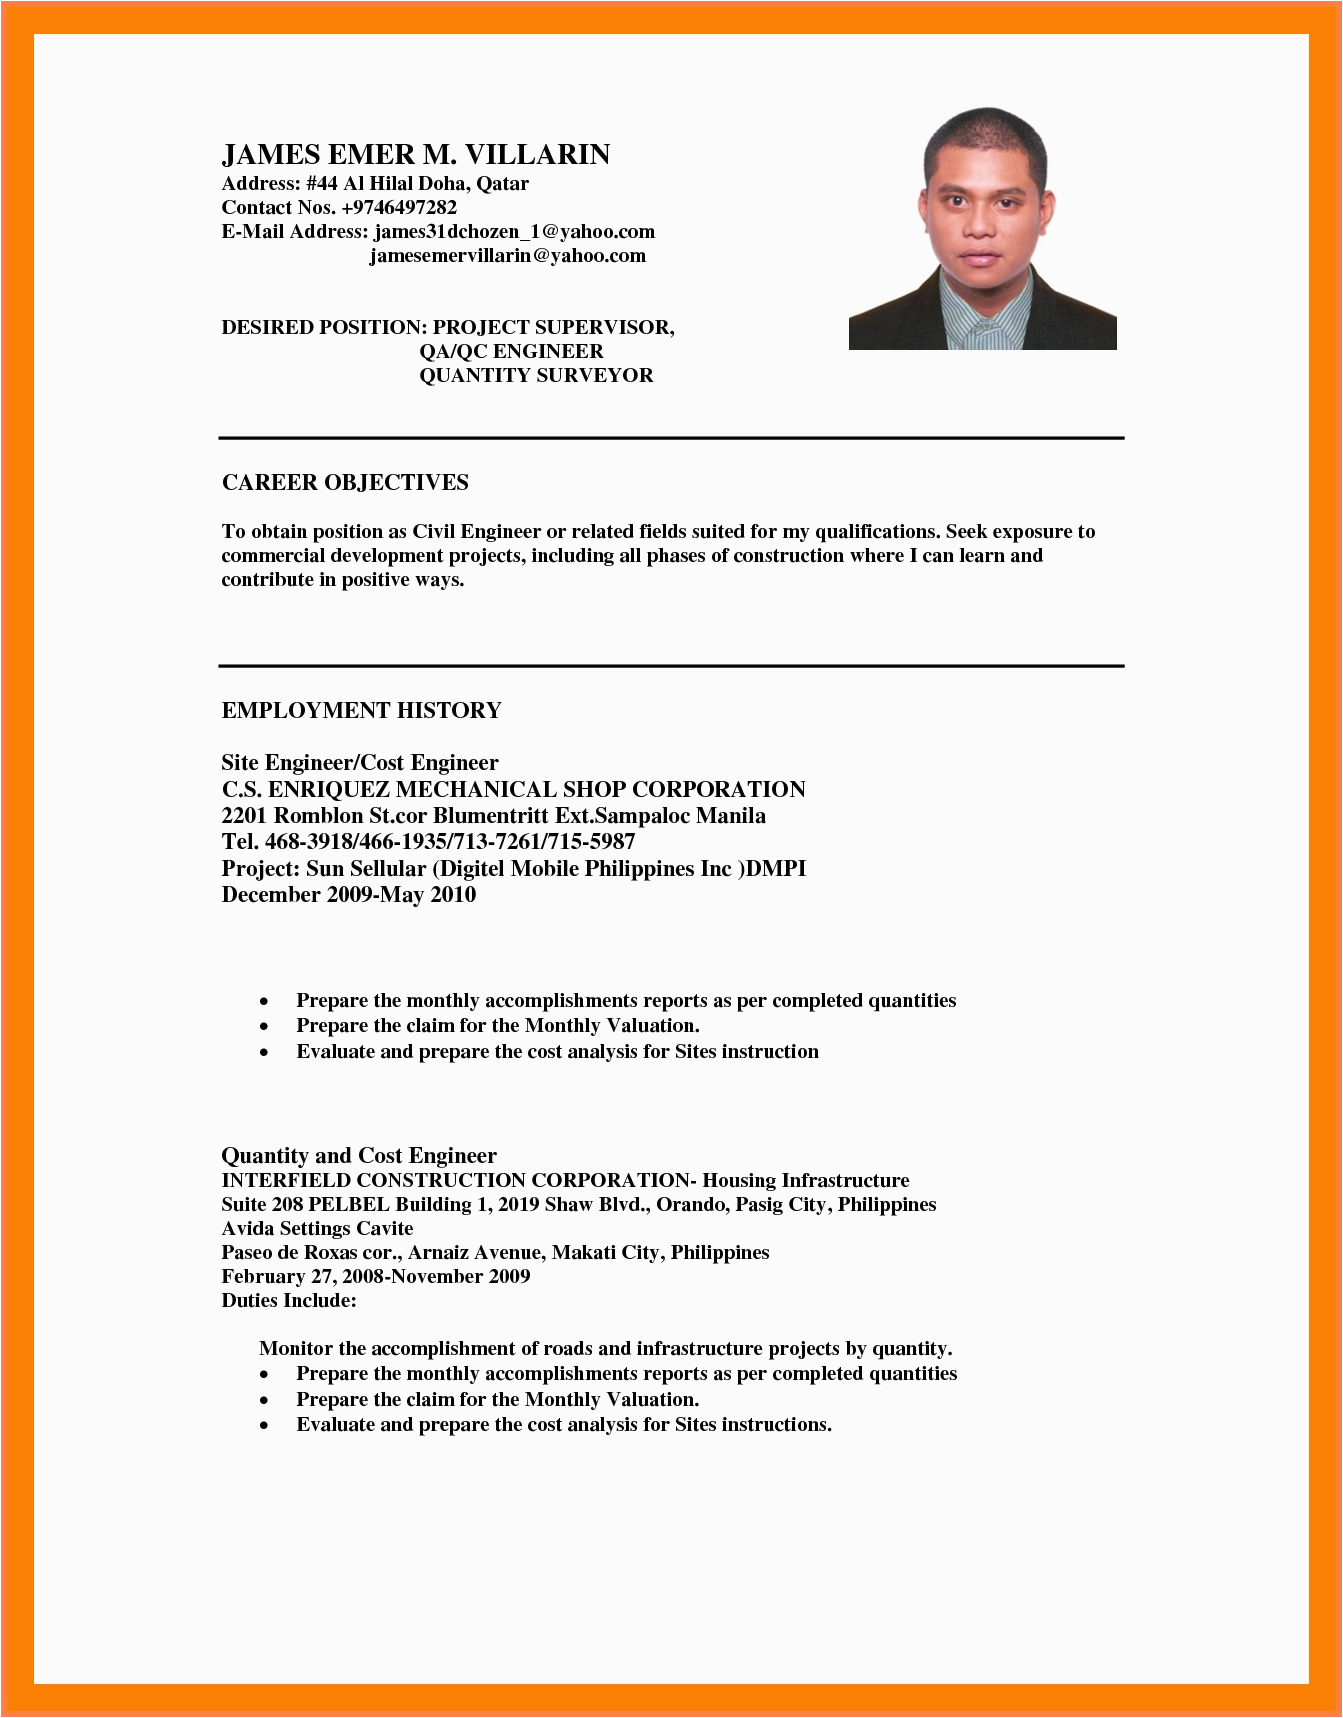 Sample Job Objectives for A Resume Resume Tips Objective Resume Templates Good Career